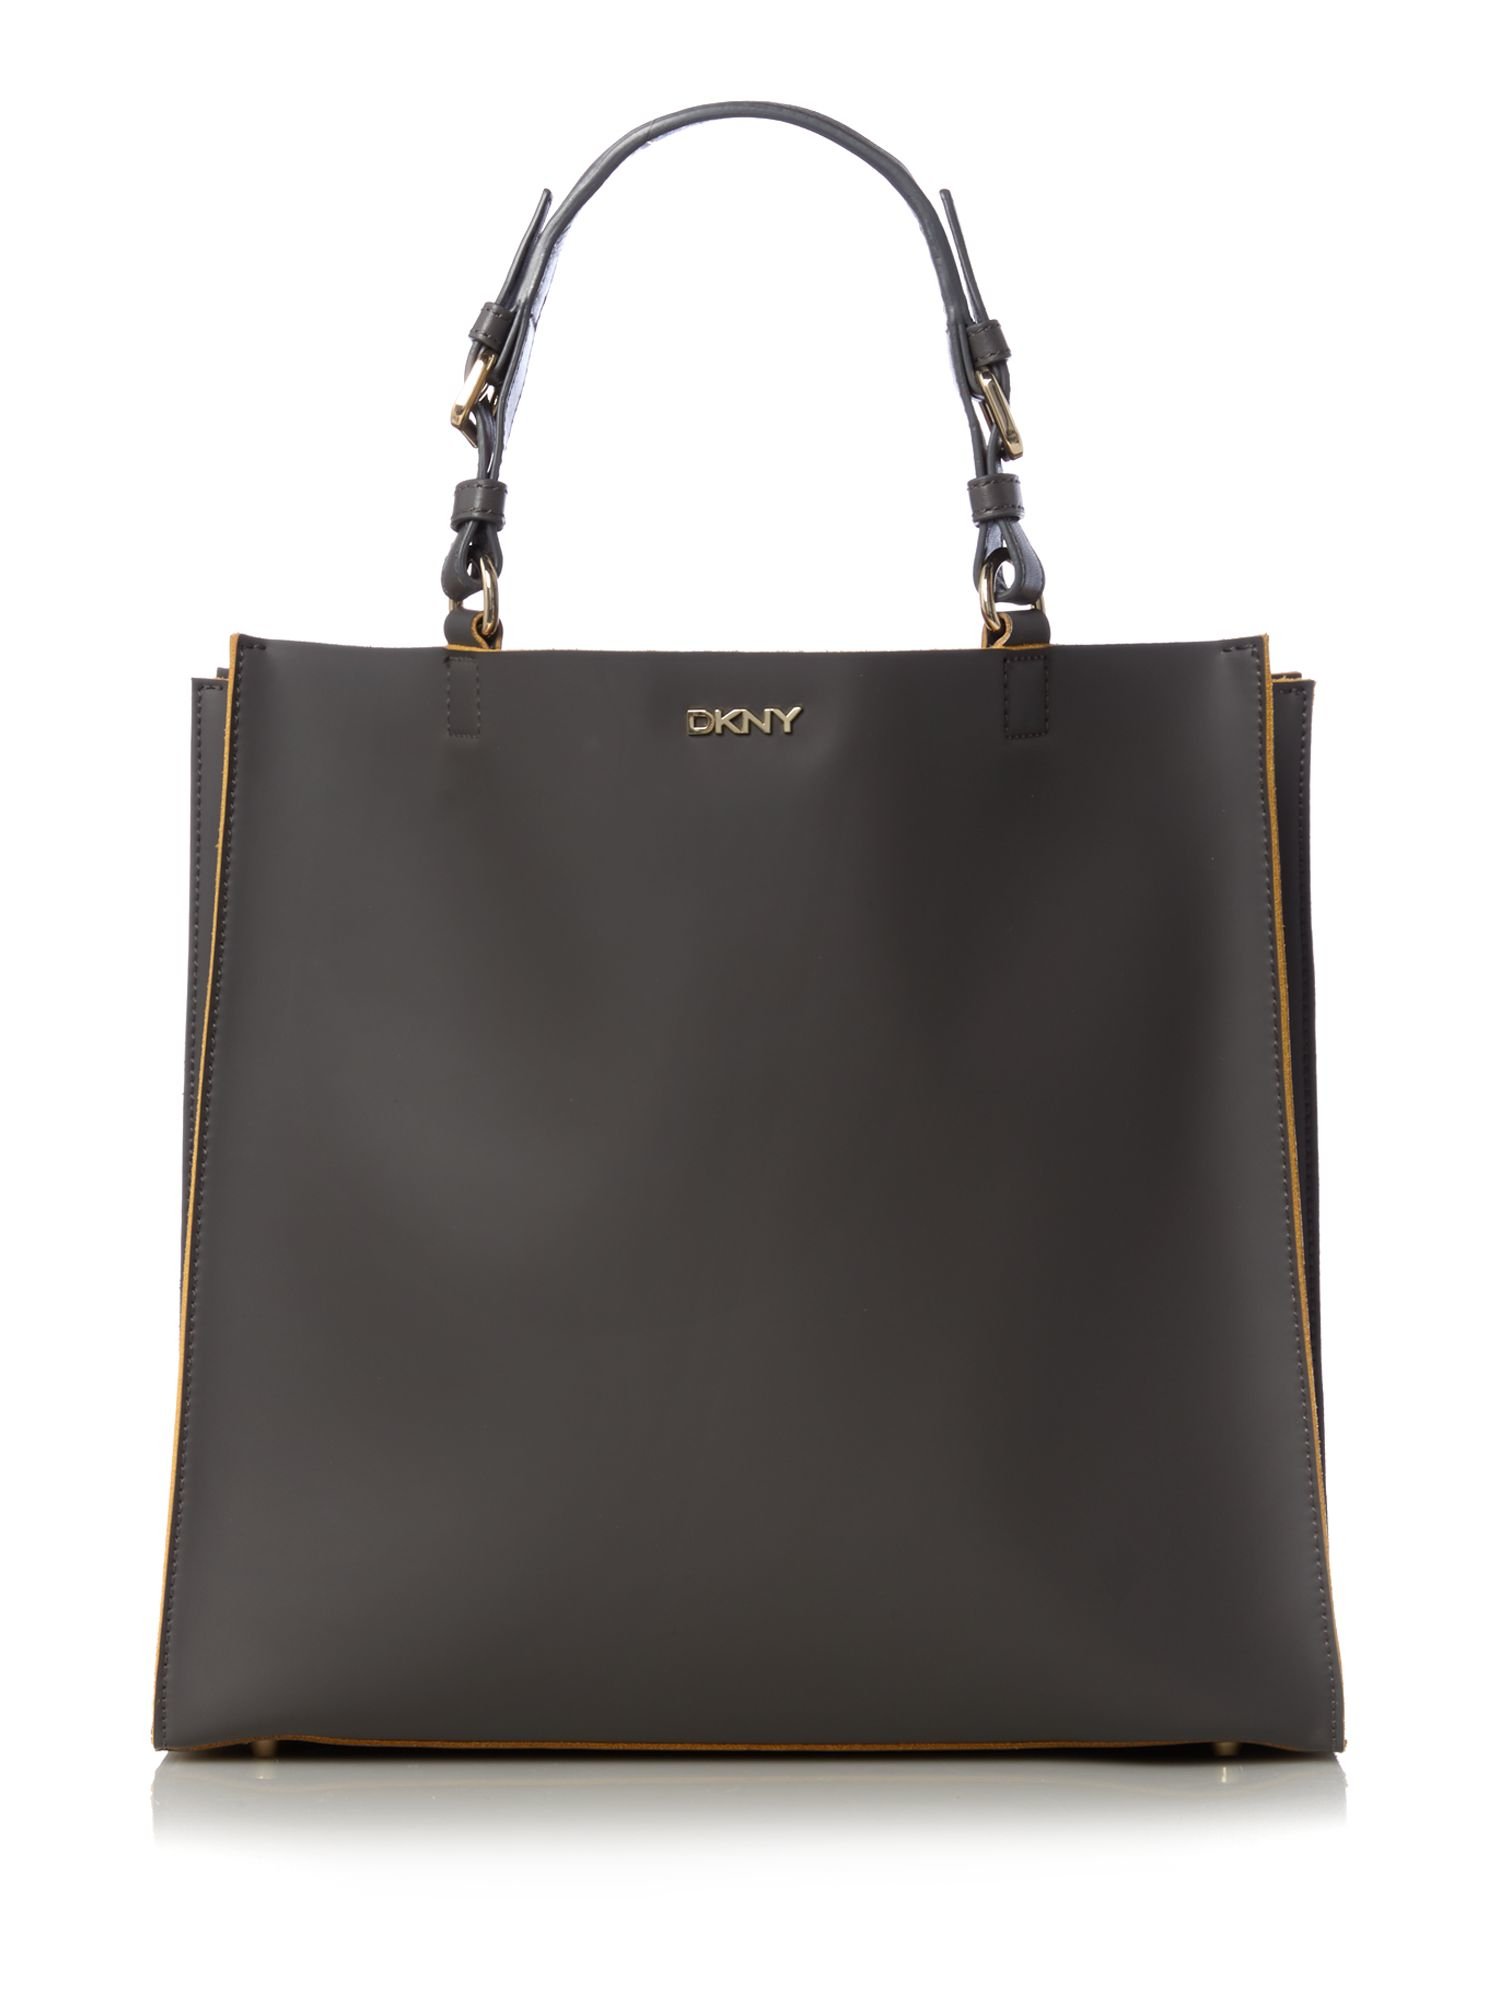 Dkny Rubberised Leather Dark Grey Tote Bag in Gray | Lyst